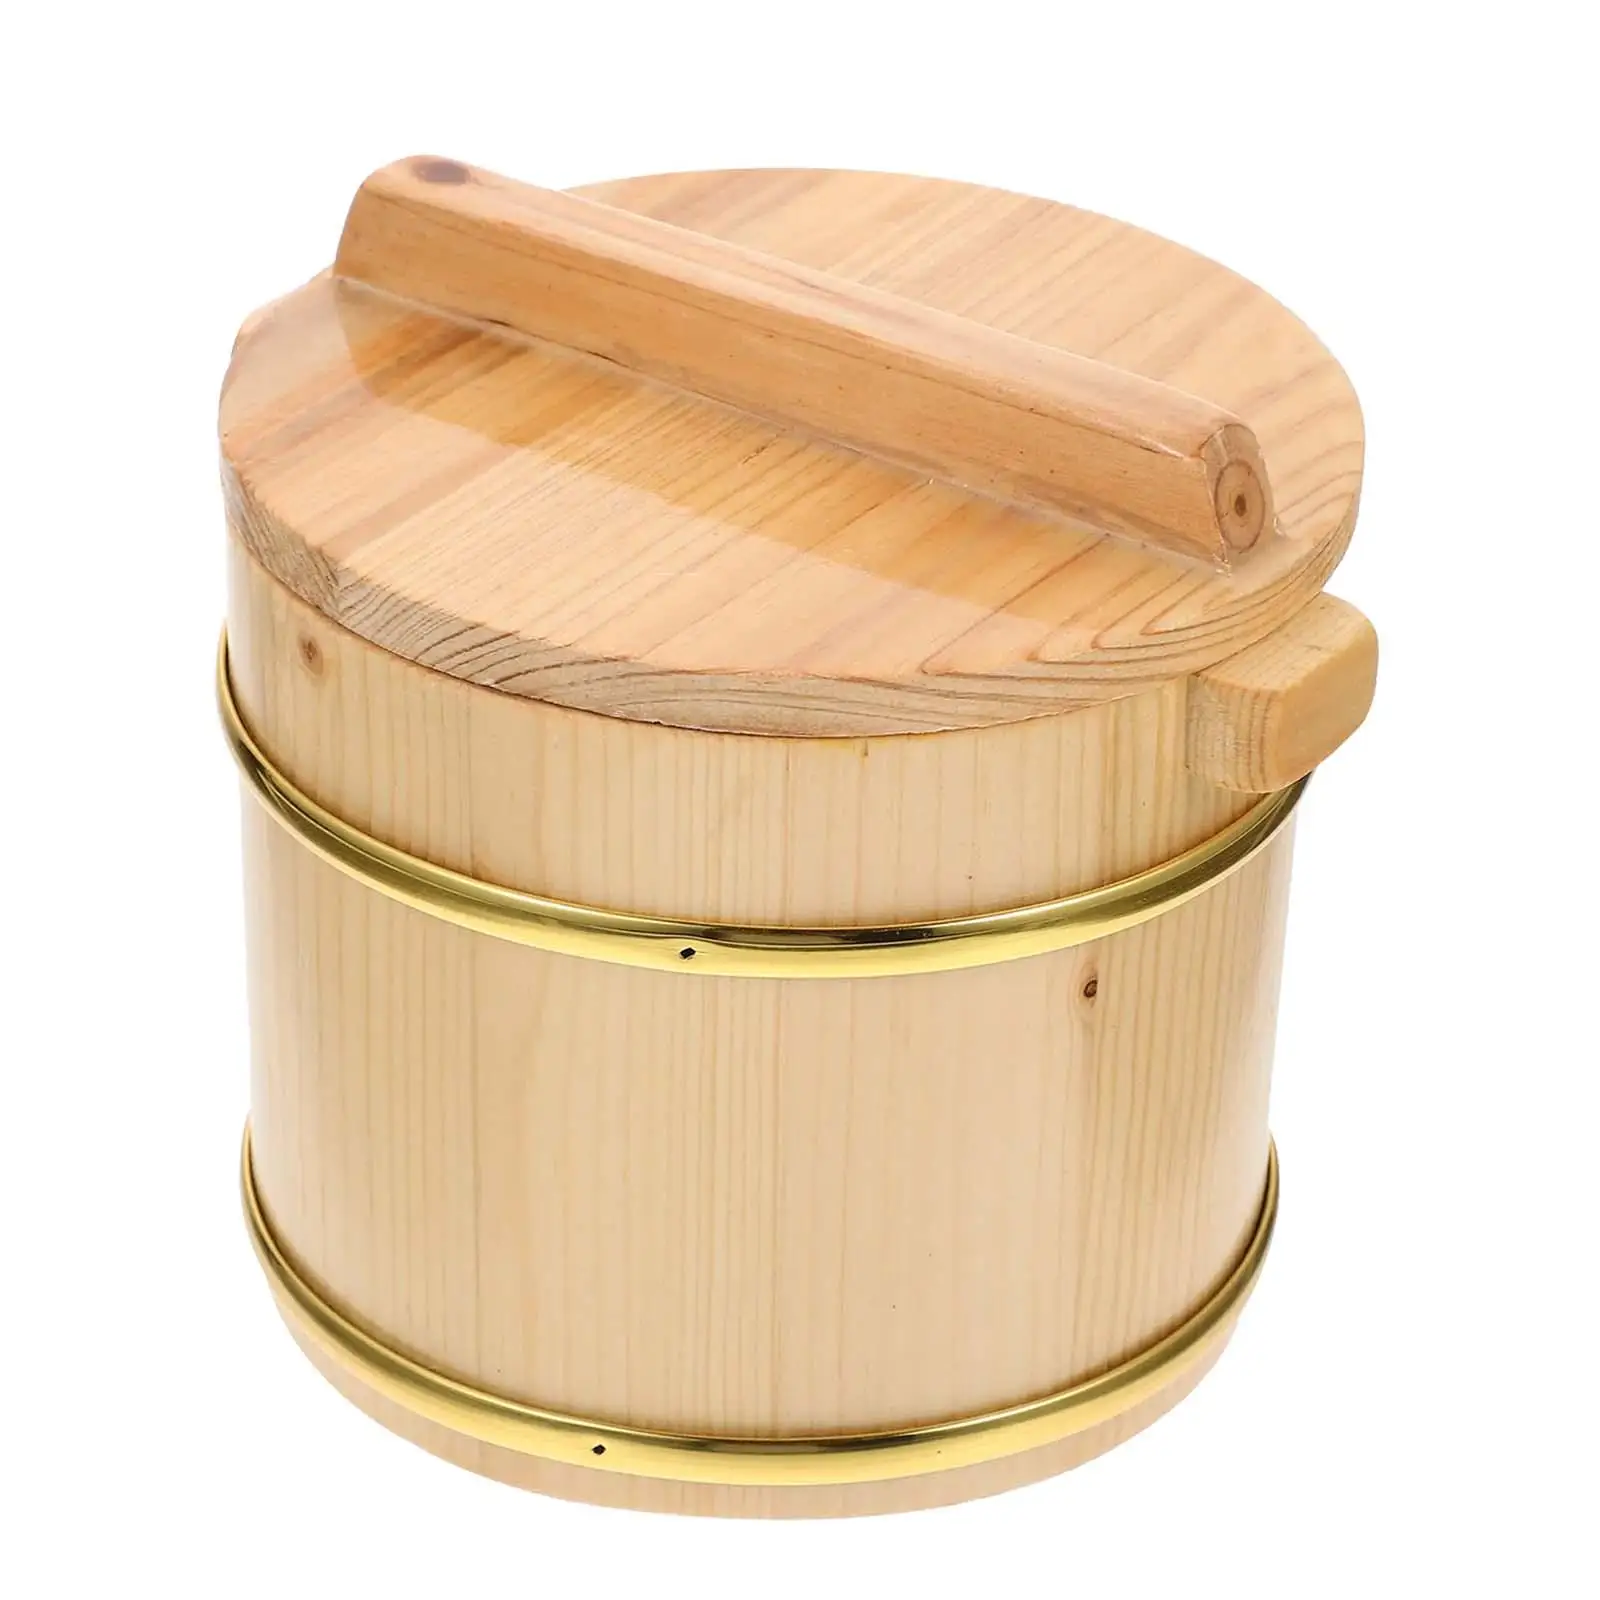 Wooden Rice Bucket Reusable Practical Rice Mixing Tub with Lid for Cooking